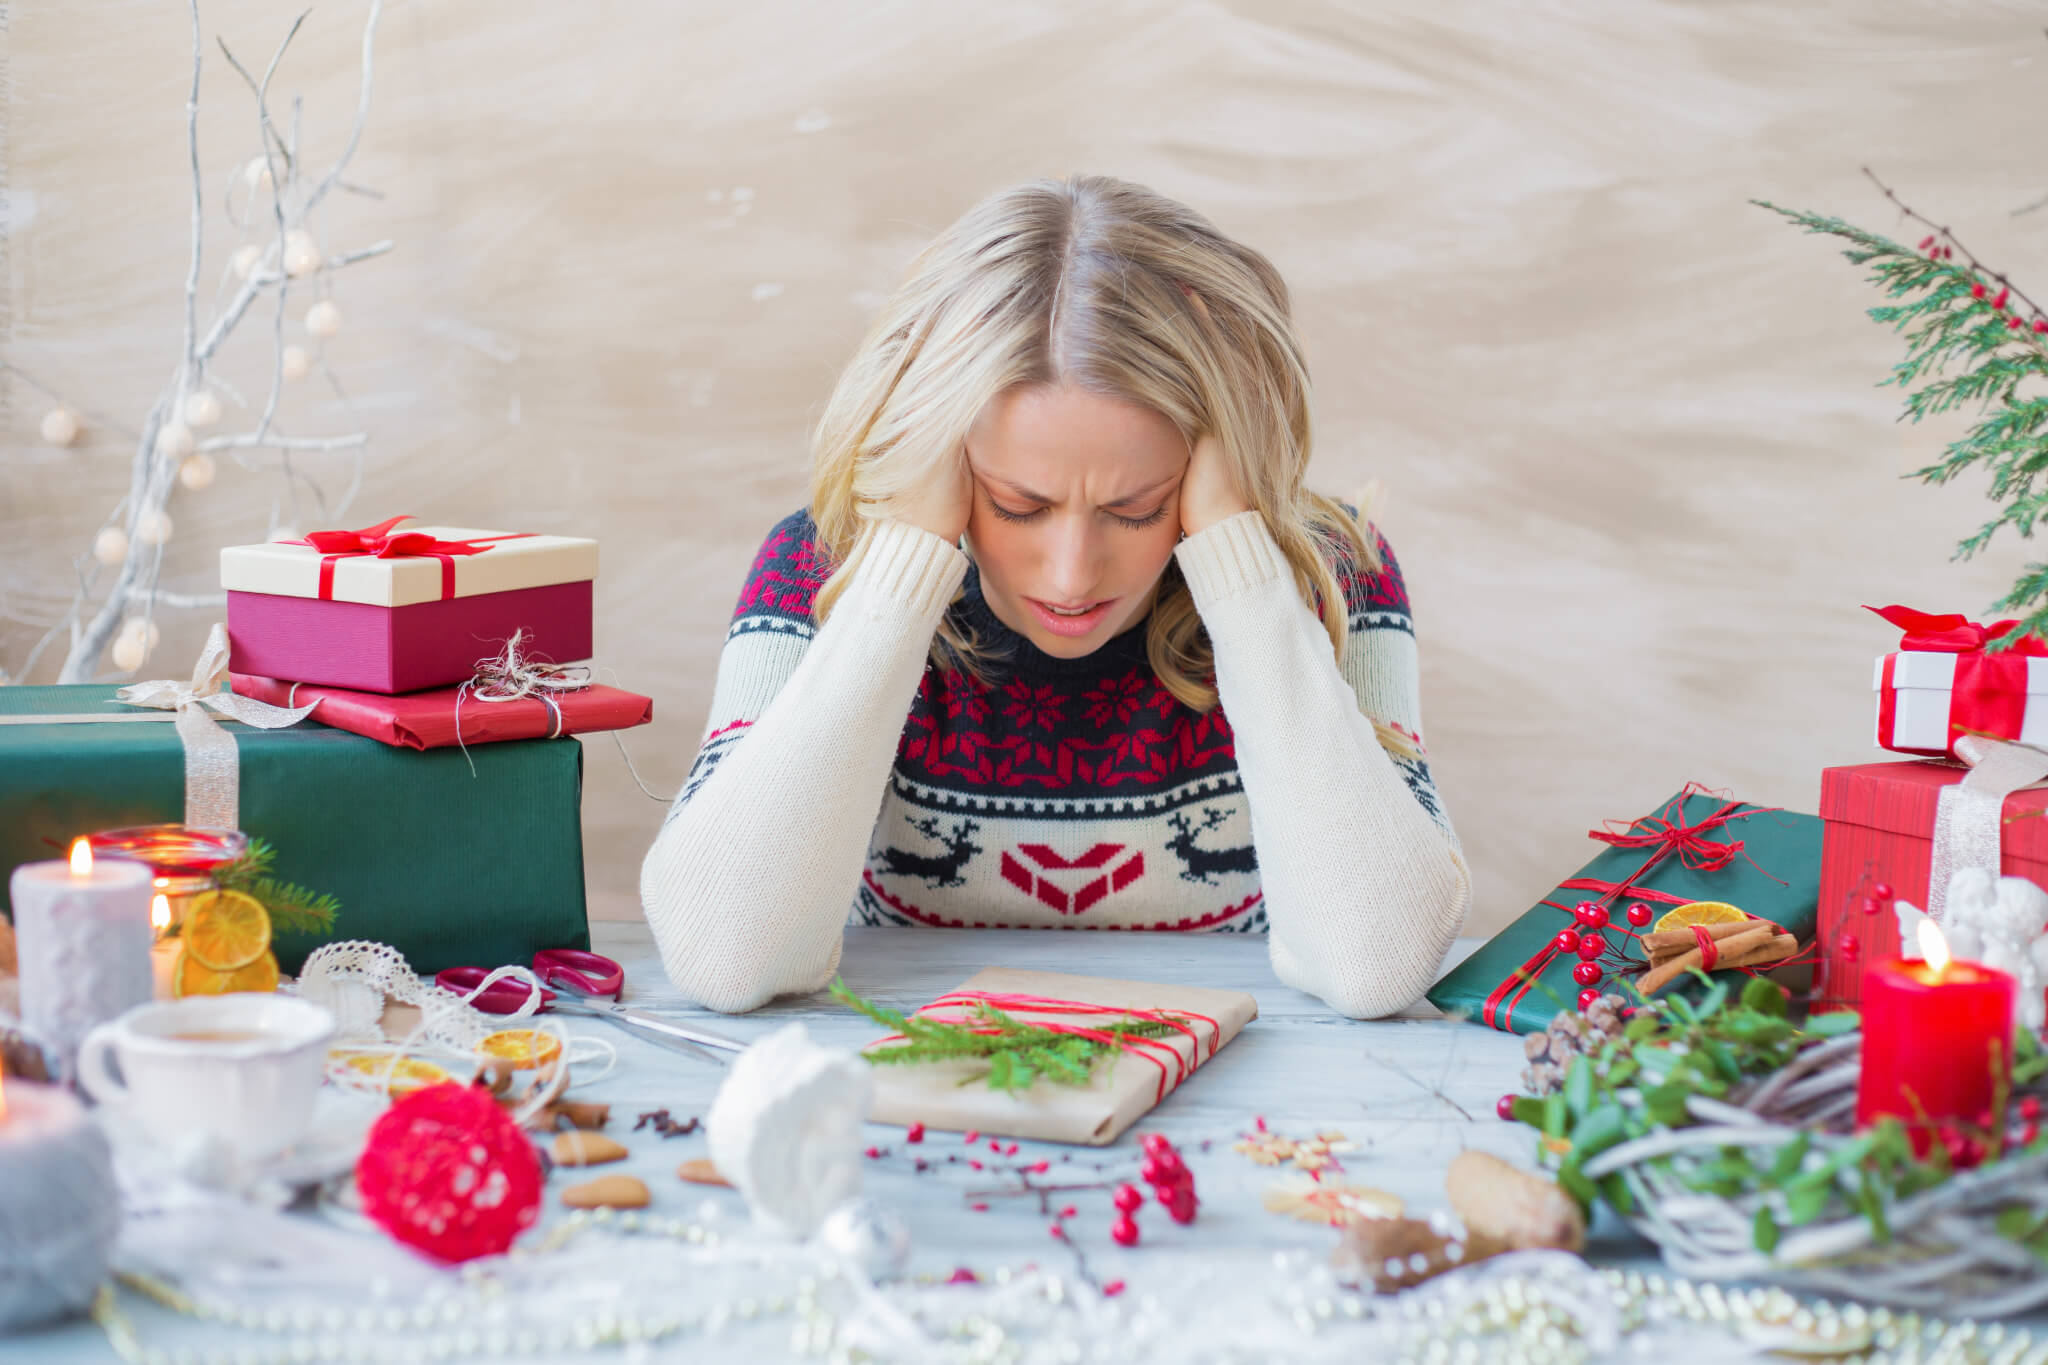 Woman stressed about Christmas and holidays